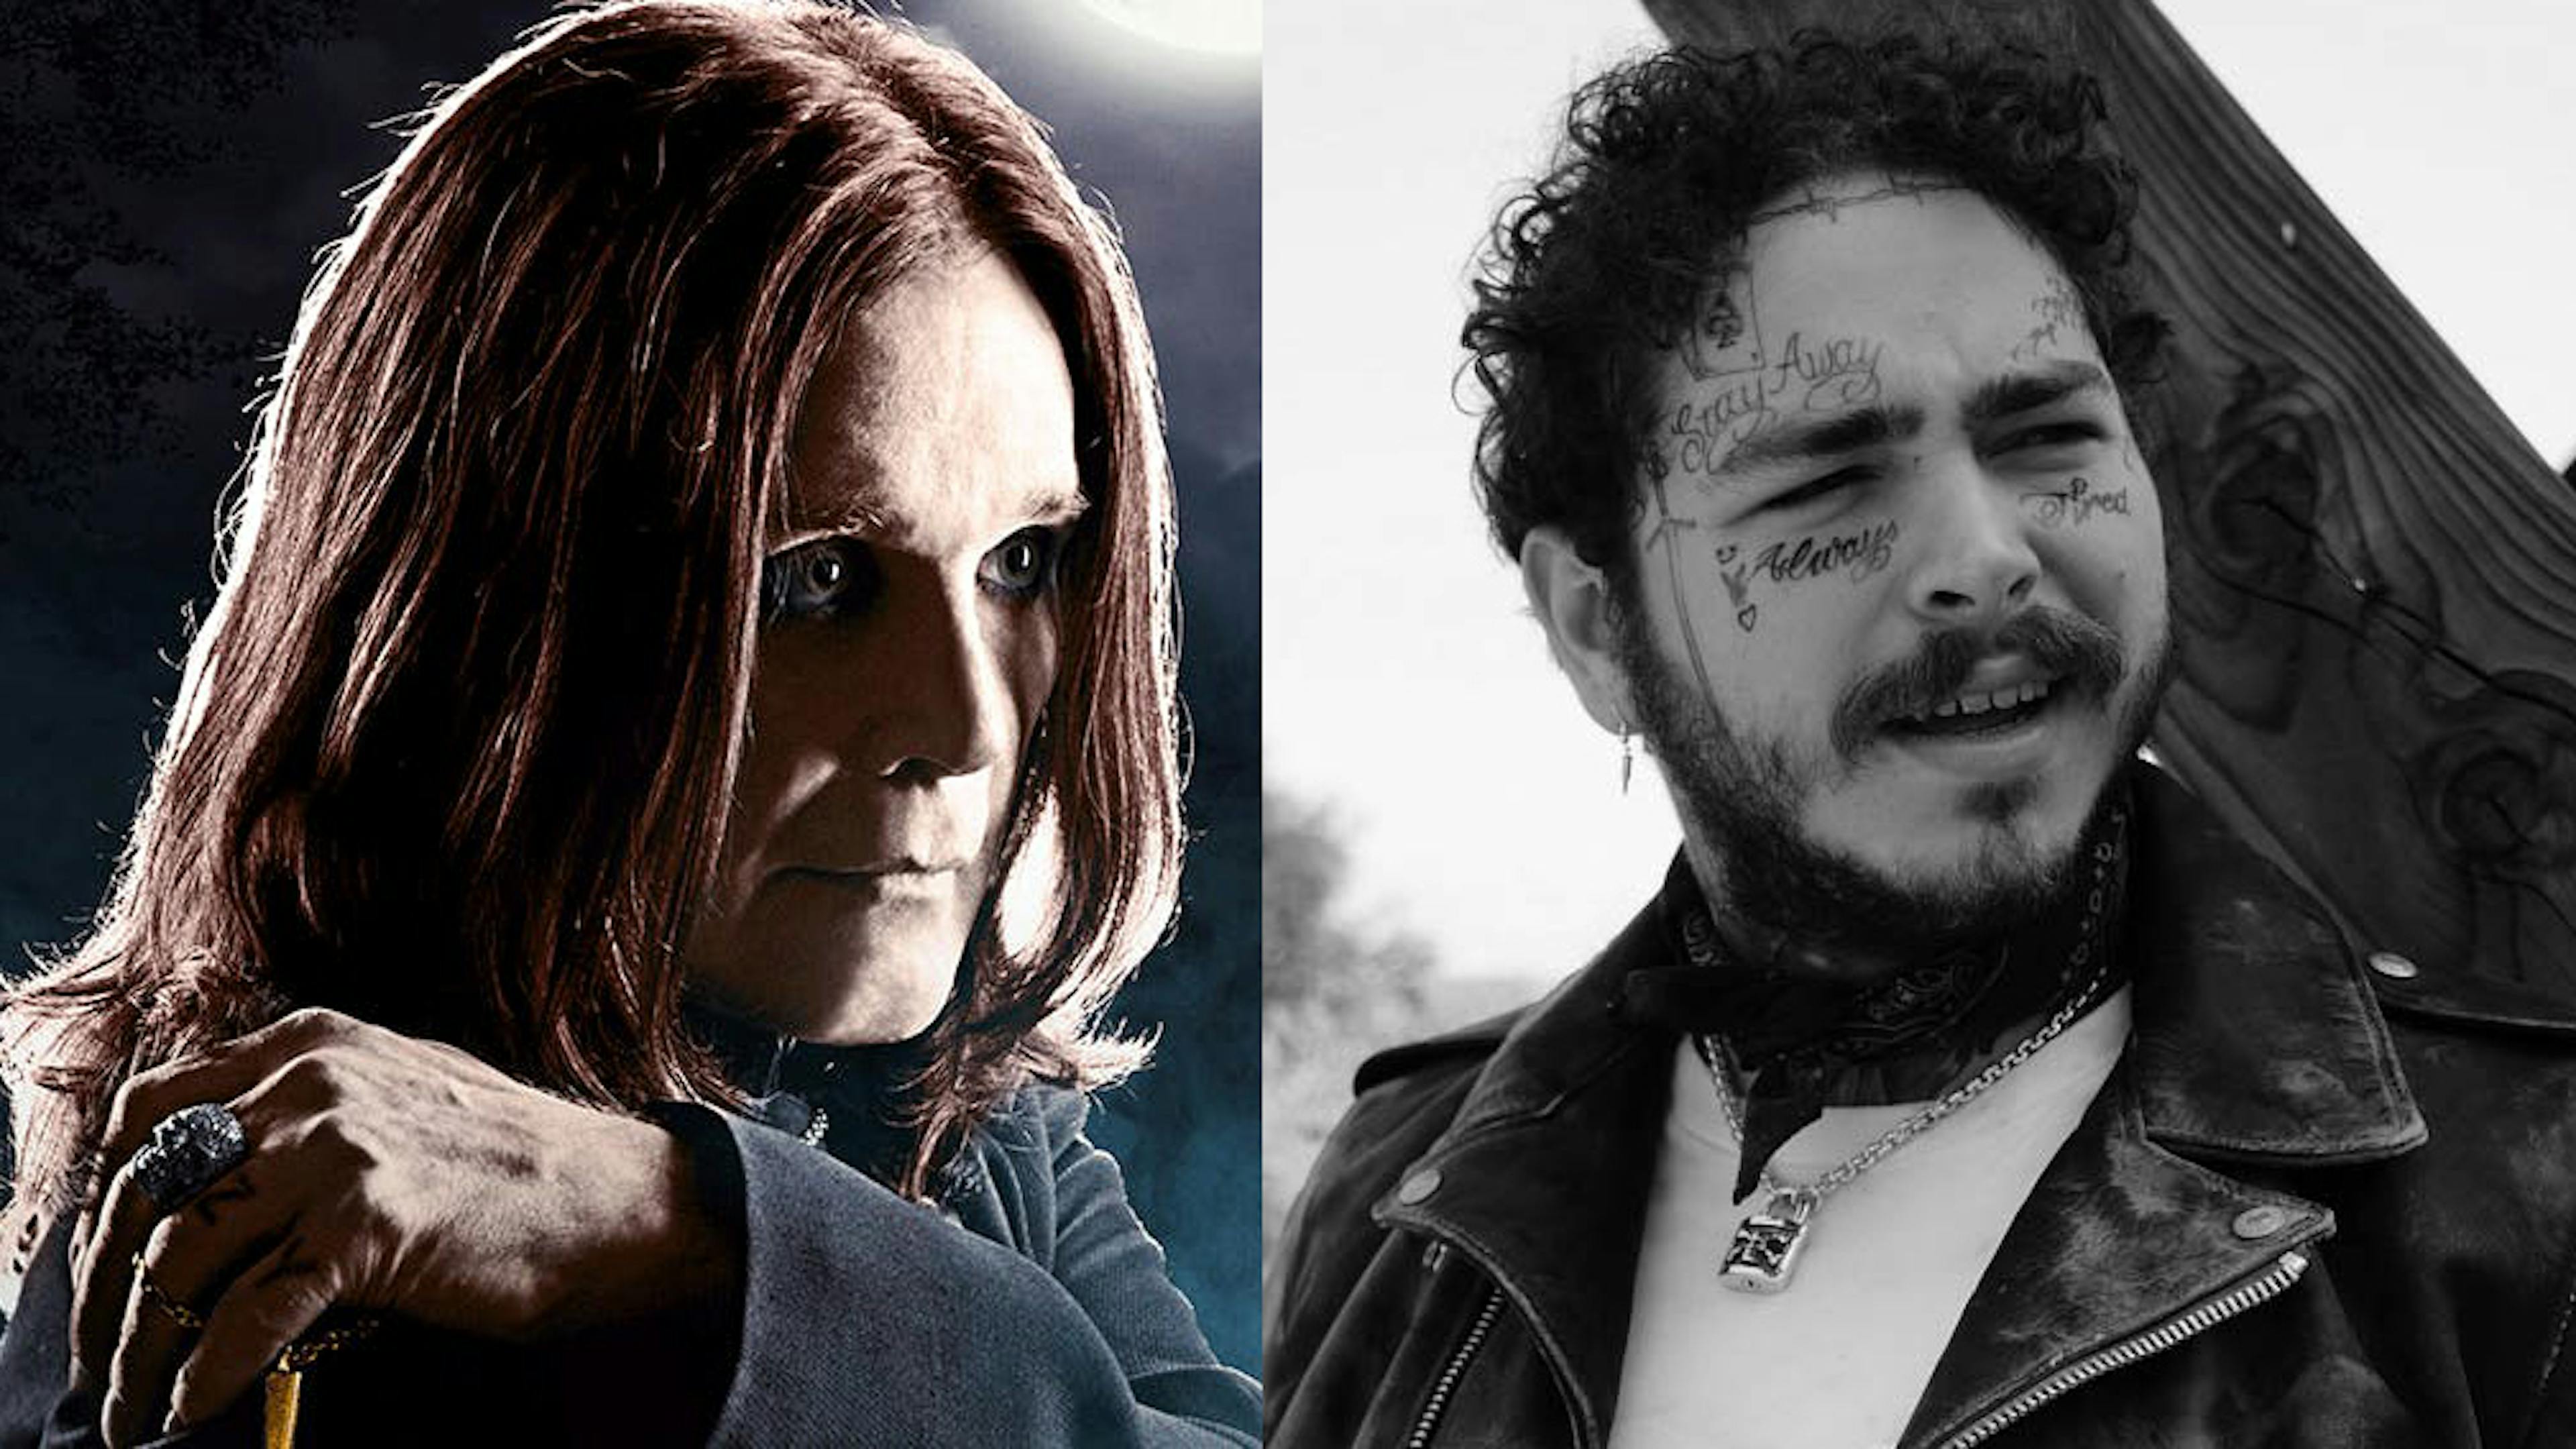 Ozzy Osbourne Will Perform With Post Malone And Travis Scott At The American Music Awards